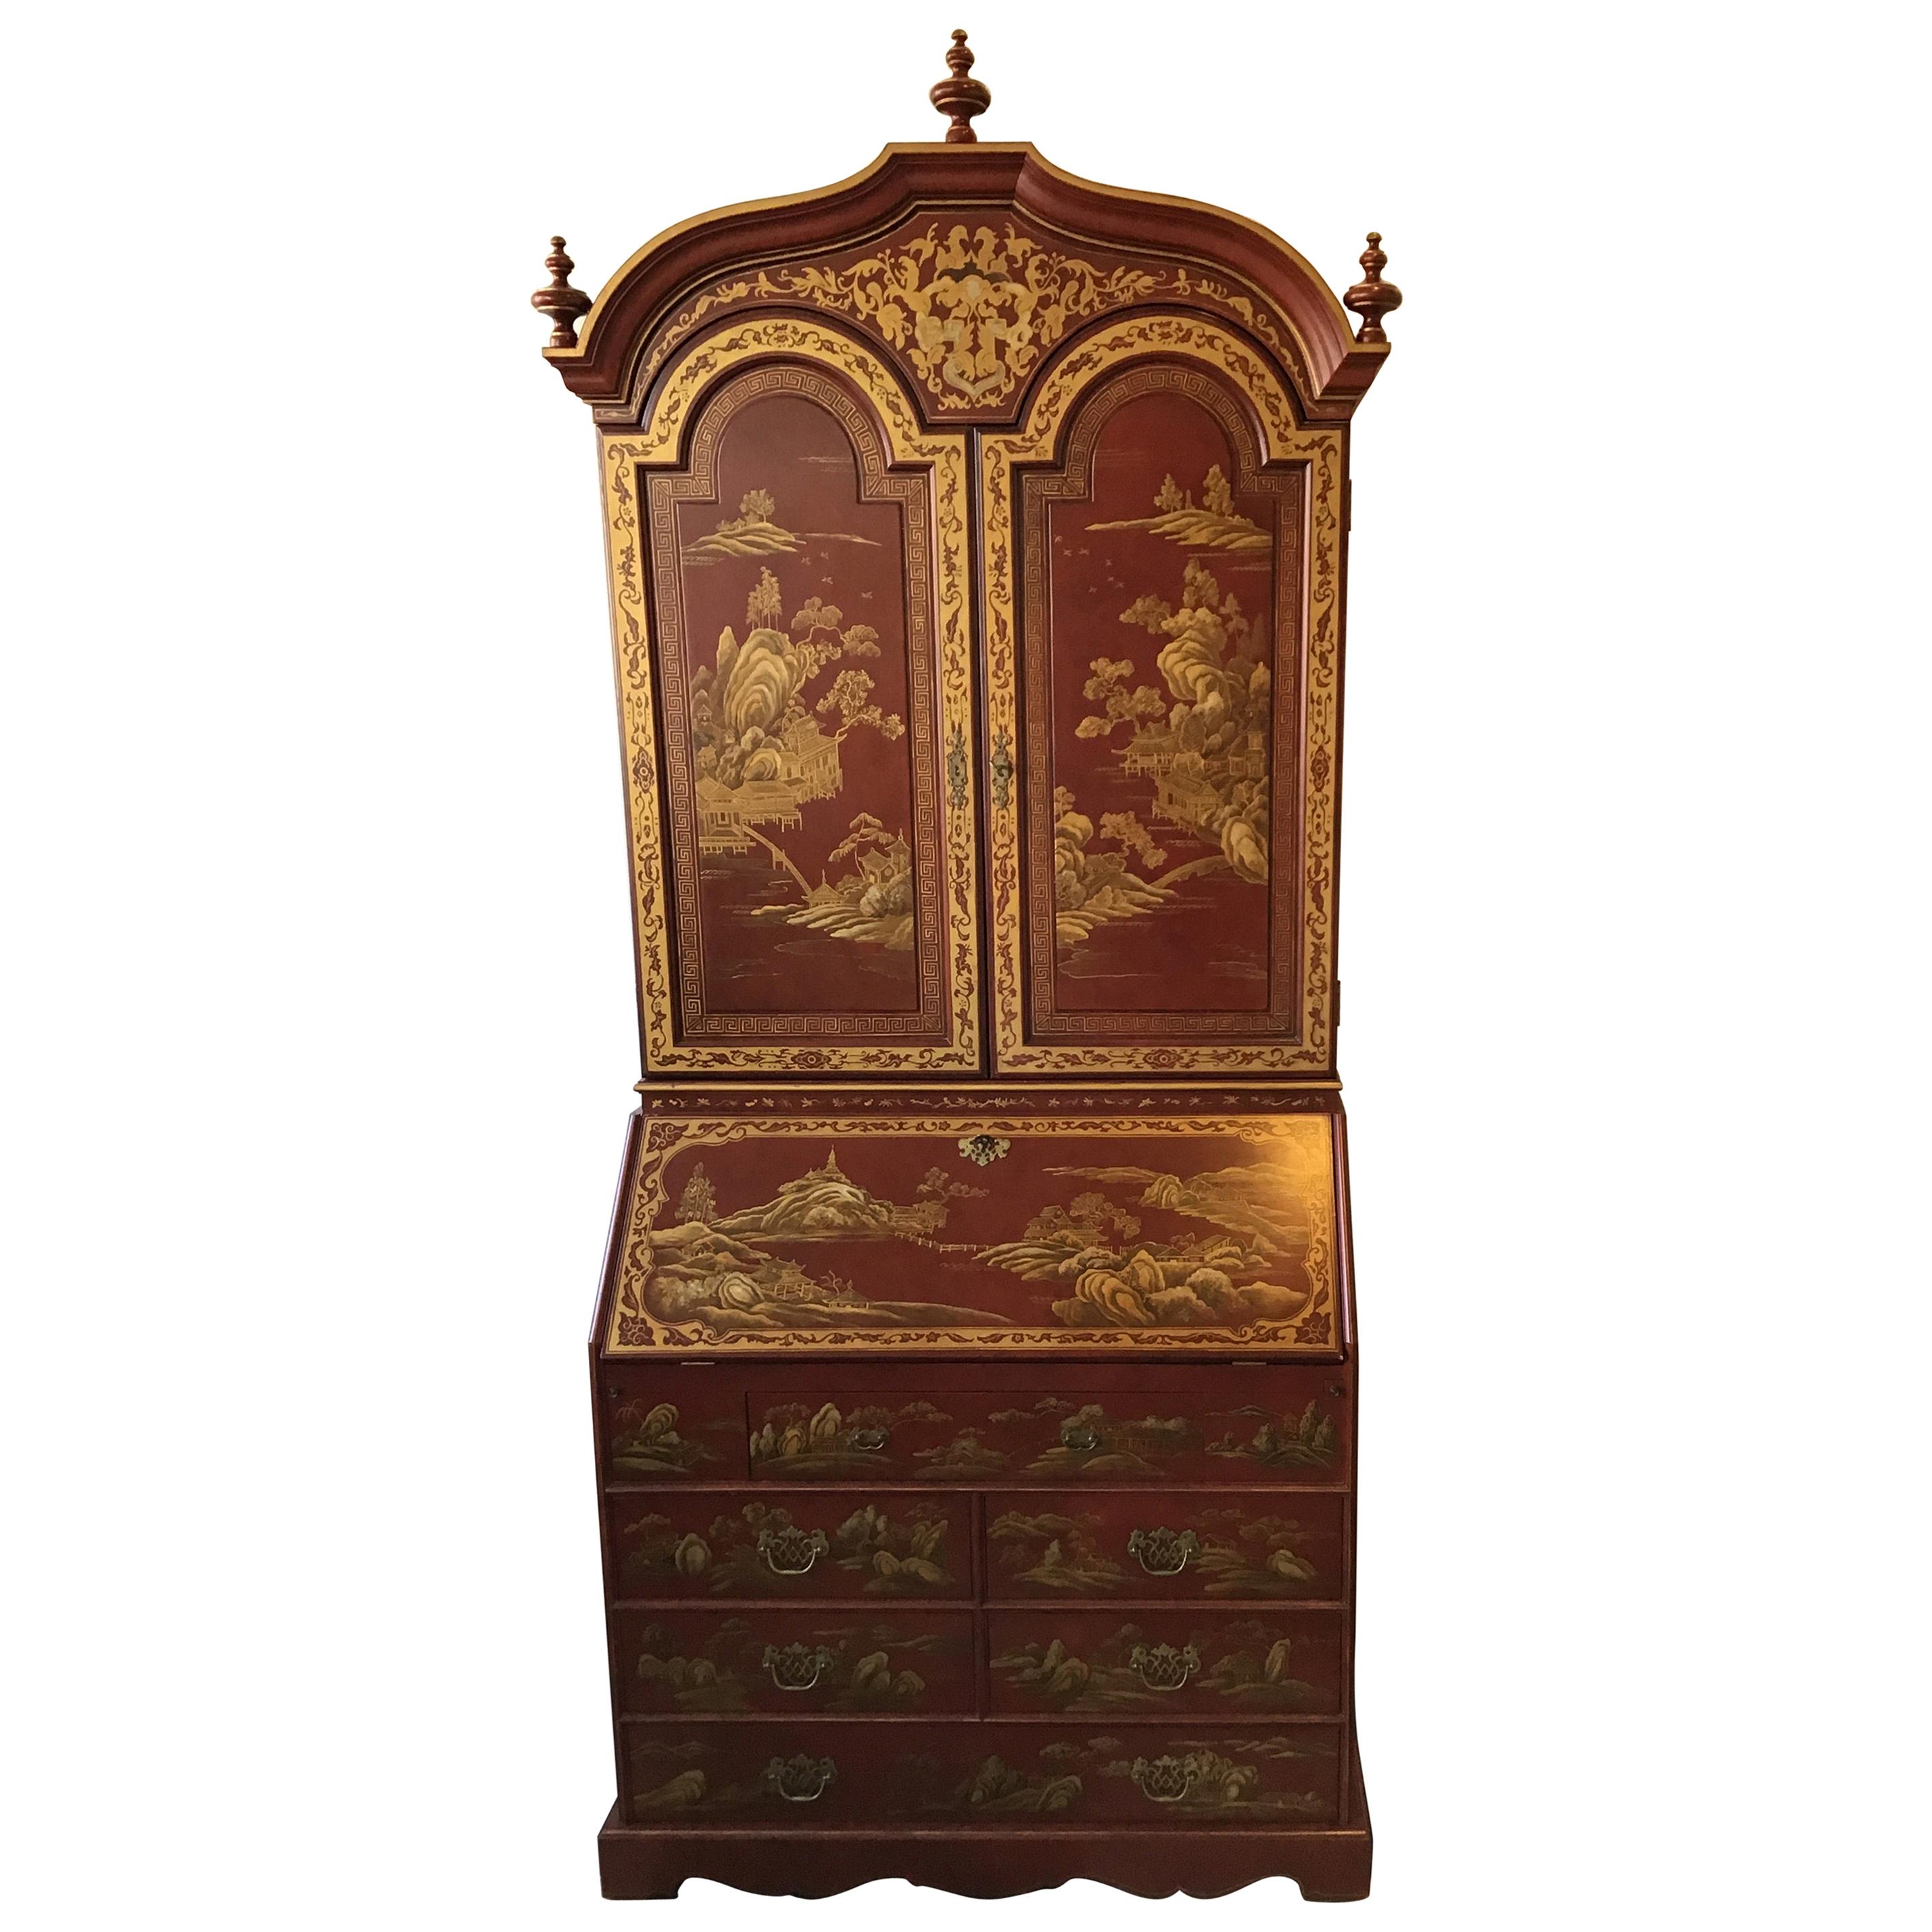 1990s red chinoiserie secretary. Eight feet high. Hand painted. From a celebrity’s Southampton, NY oceanfront estate.